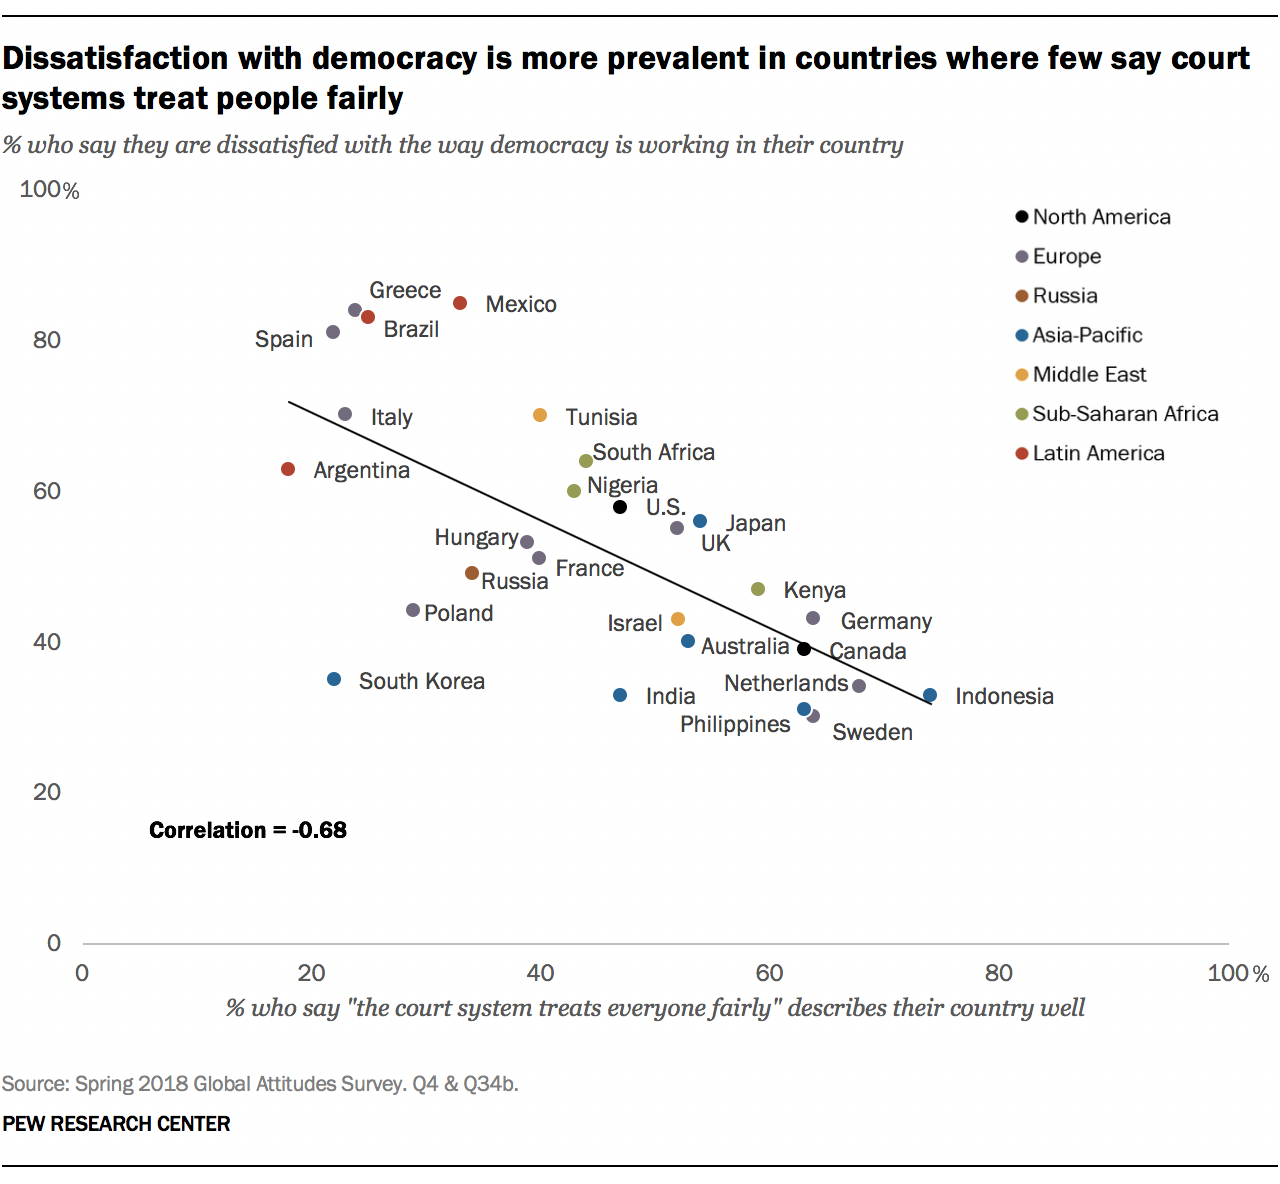 Dissatisfaction with democracy is more prevalent in countries where few say court systems treat people fairly